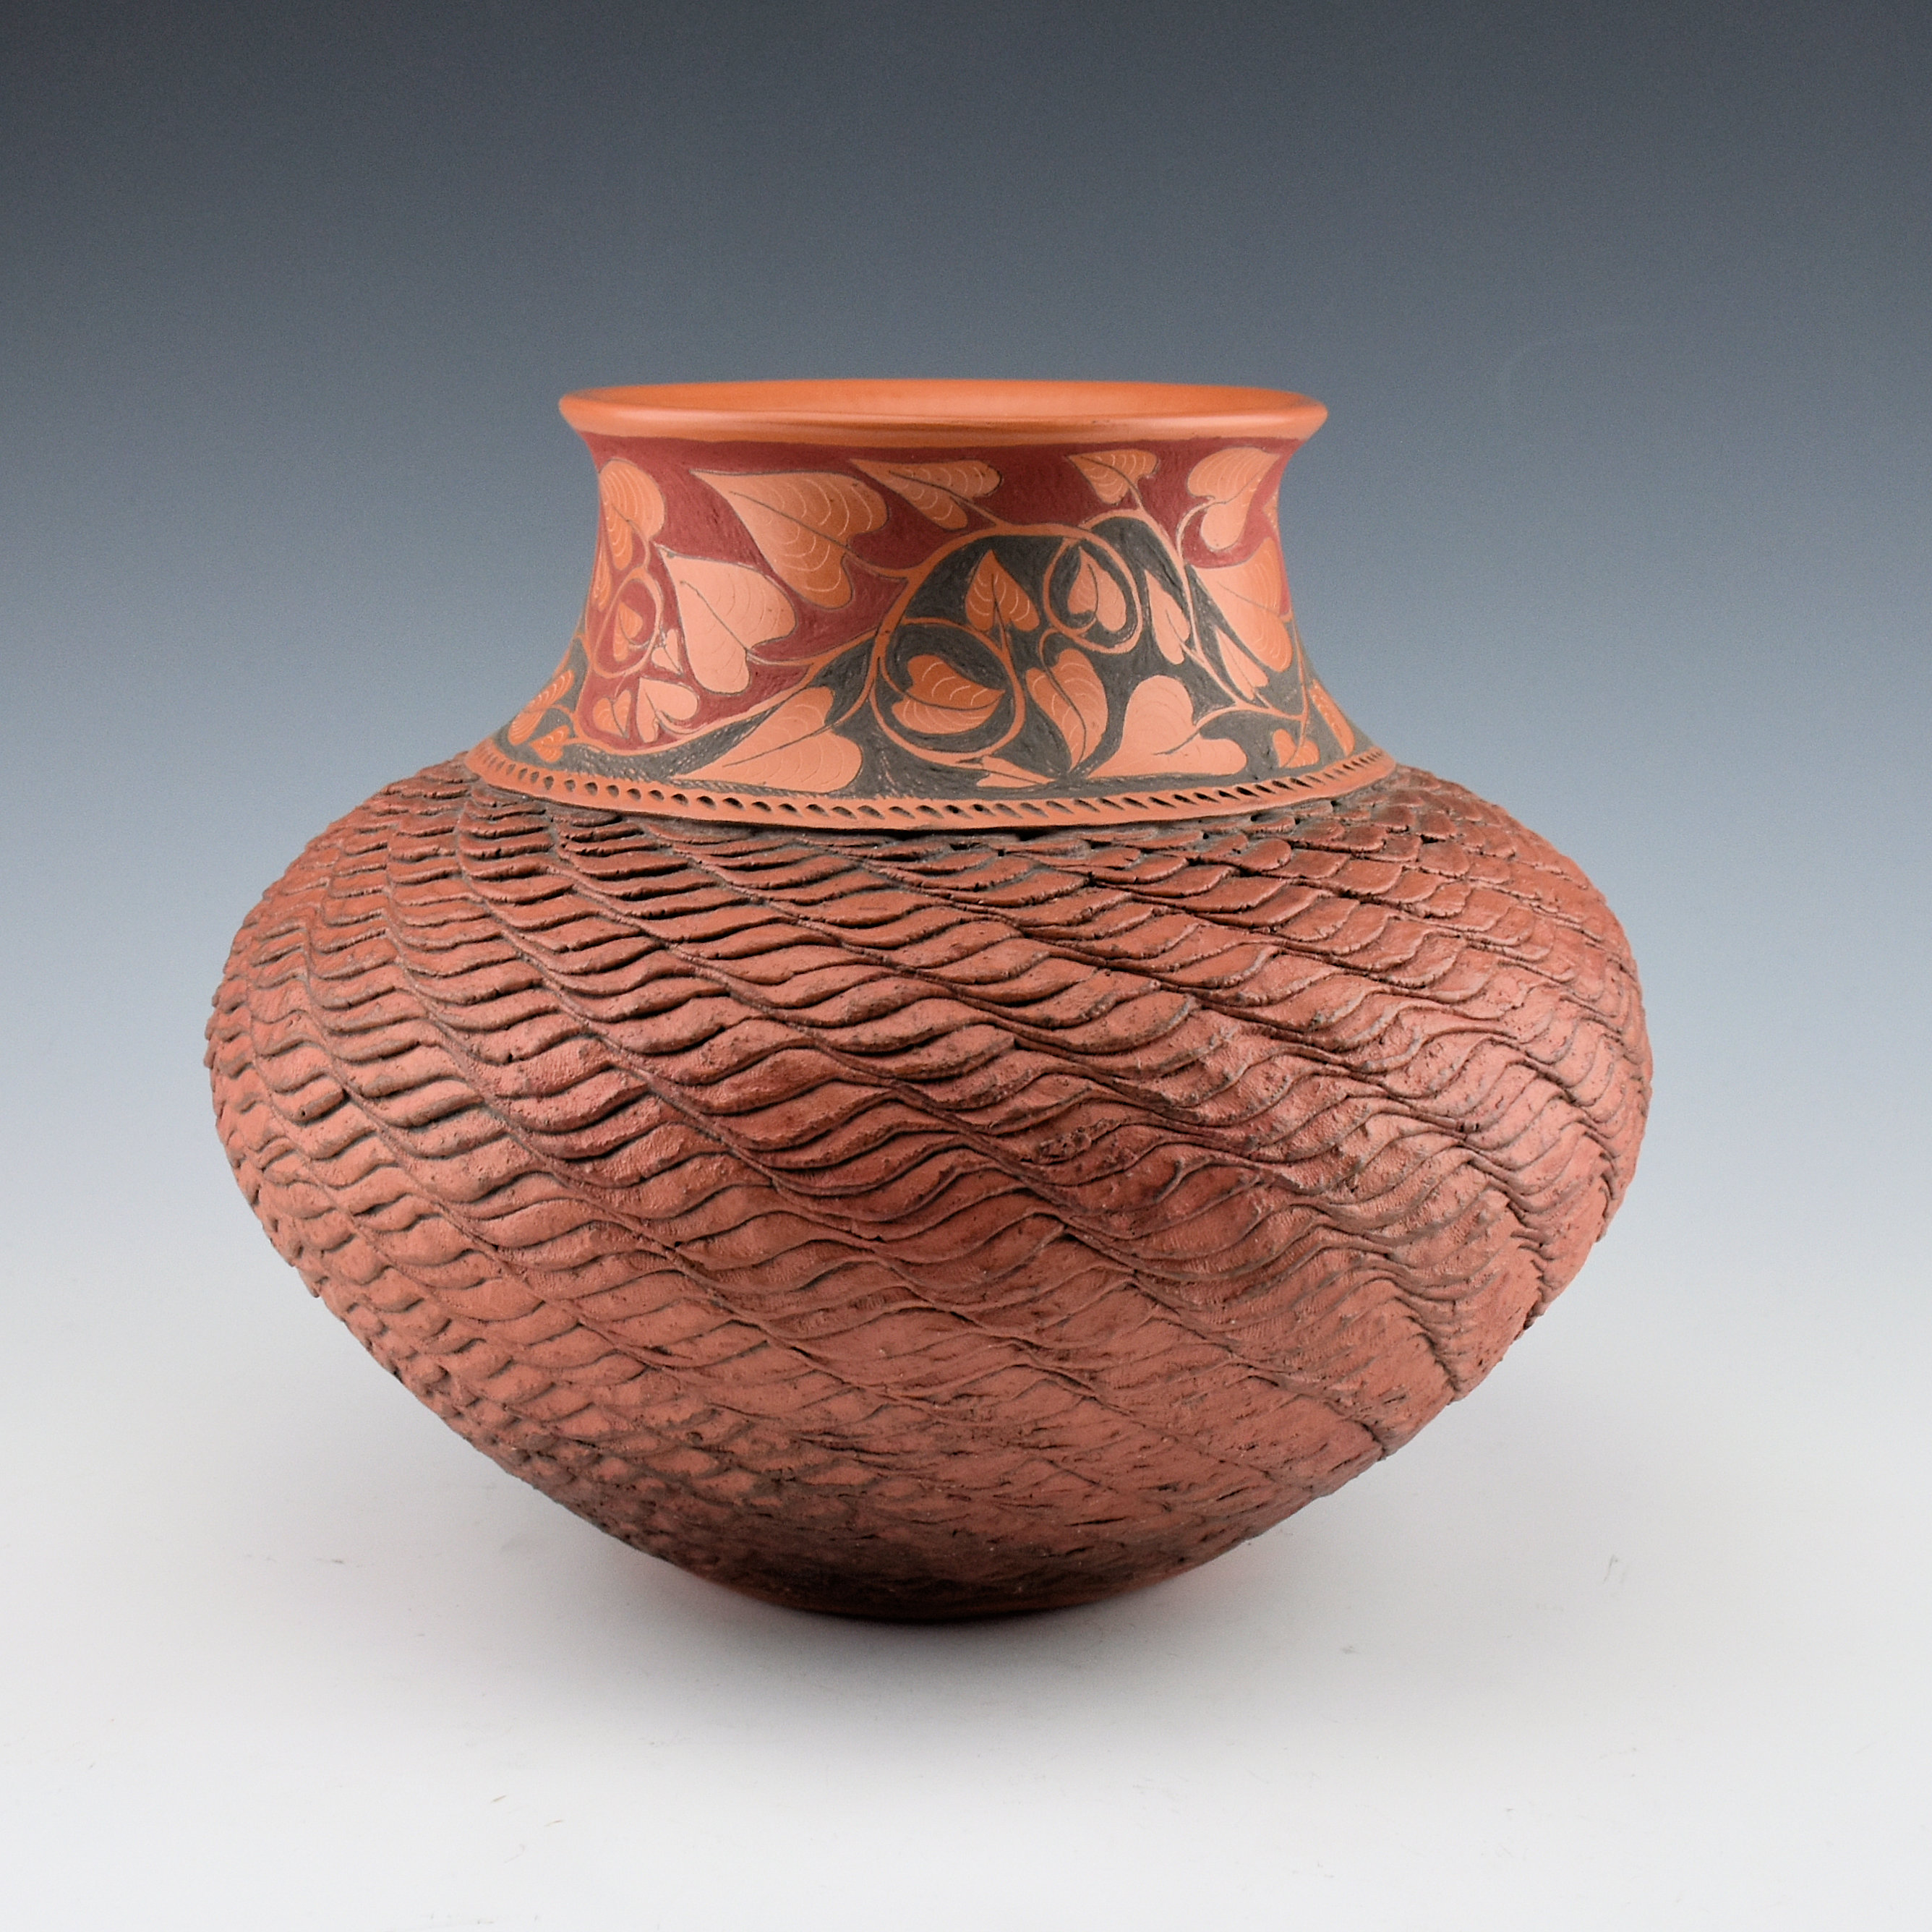 This circa-2000s corrugated jar that also has incised and painted leaves running around its shoulder represents an unusual design for Richard Zane Smith. Image courtesy of King Galleries.